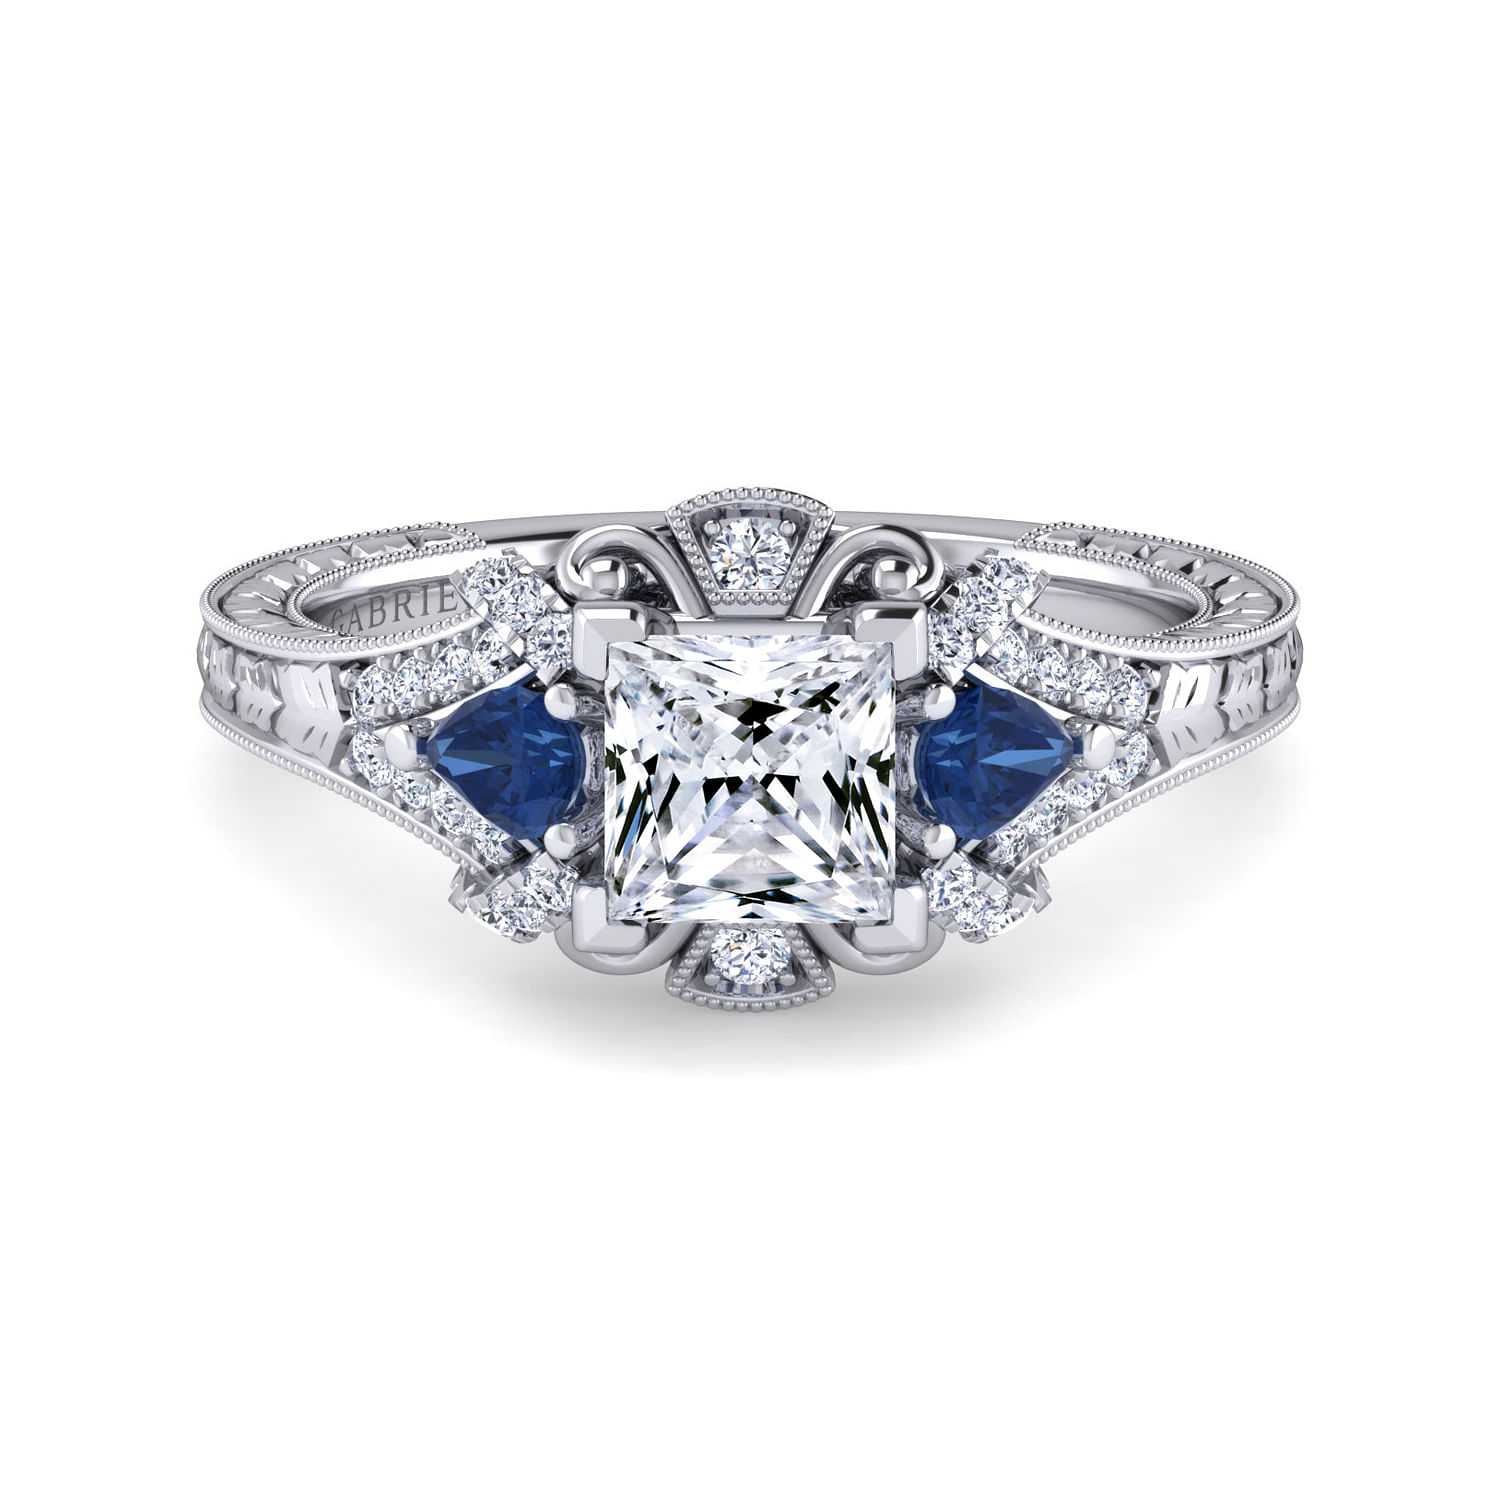 Chrystie - 14K White Gold Princess Cut Sapphire and Diamond Engagement Ring